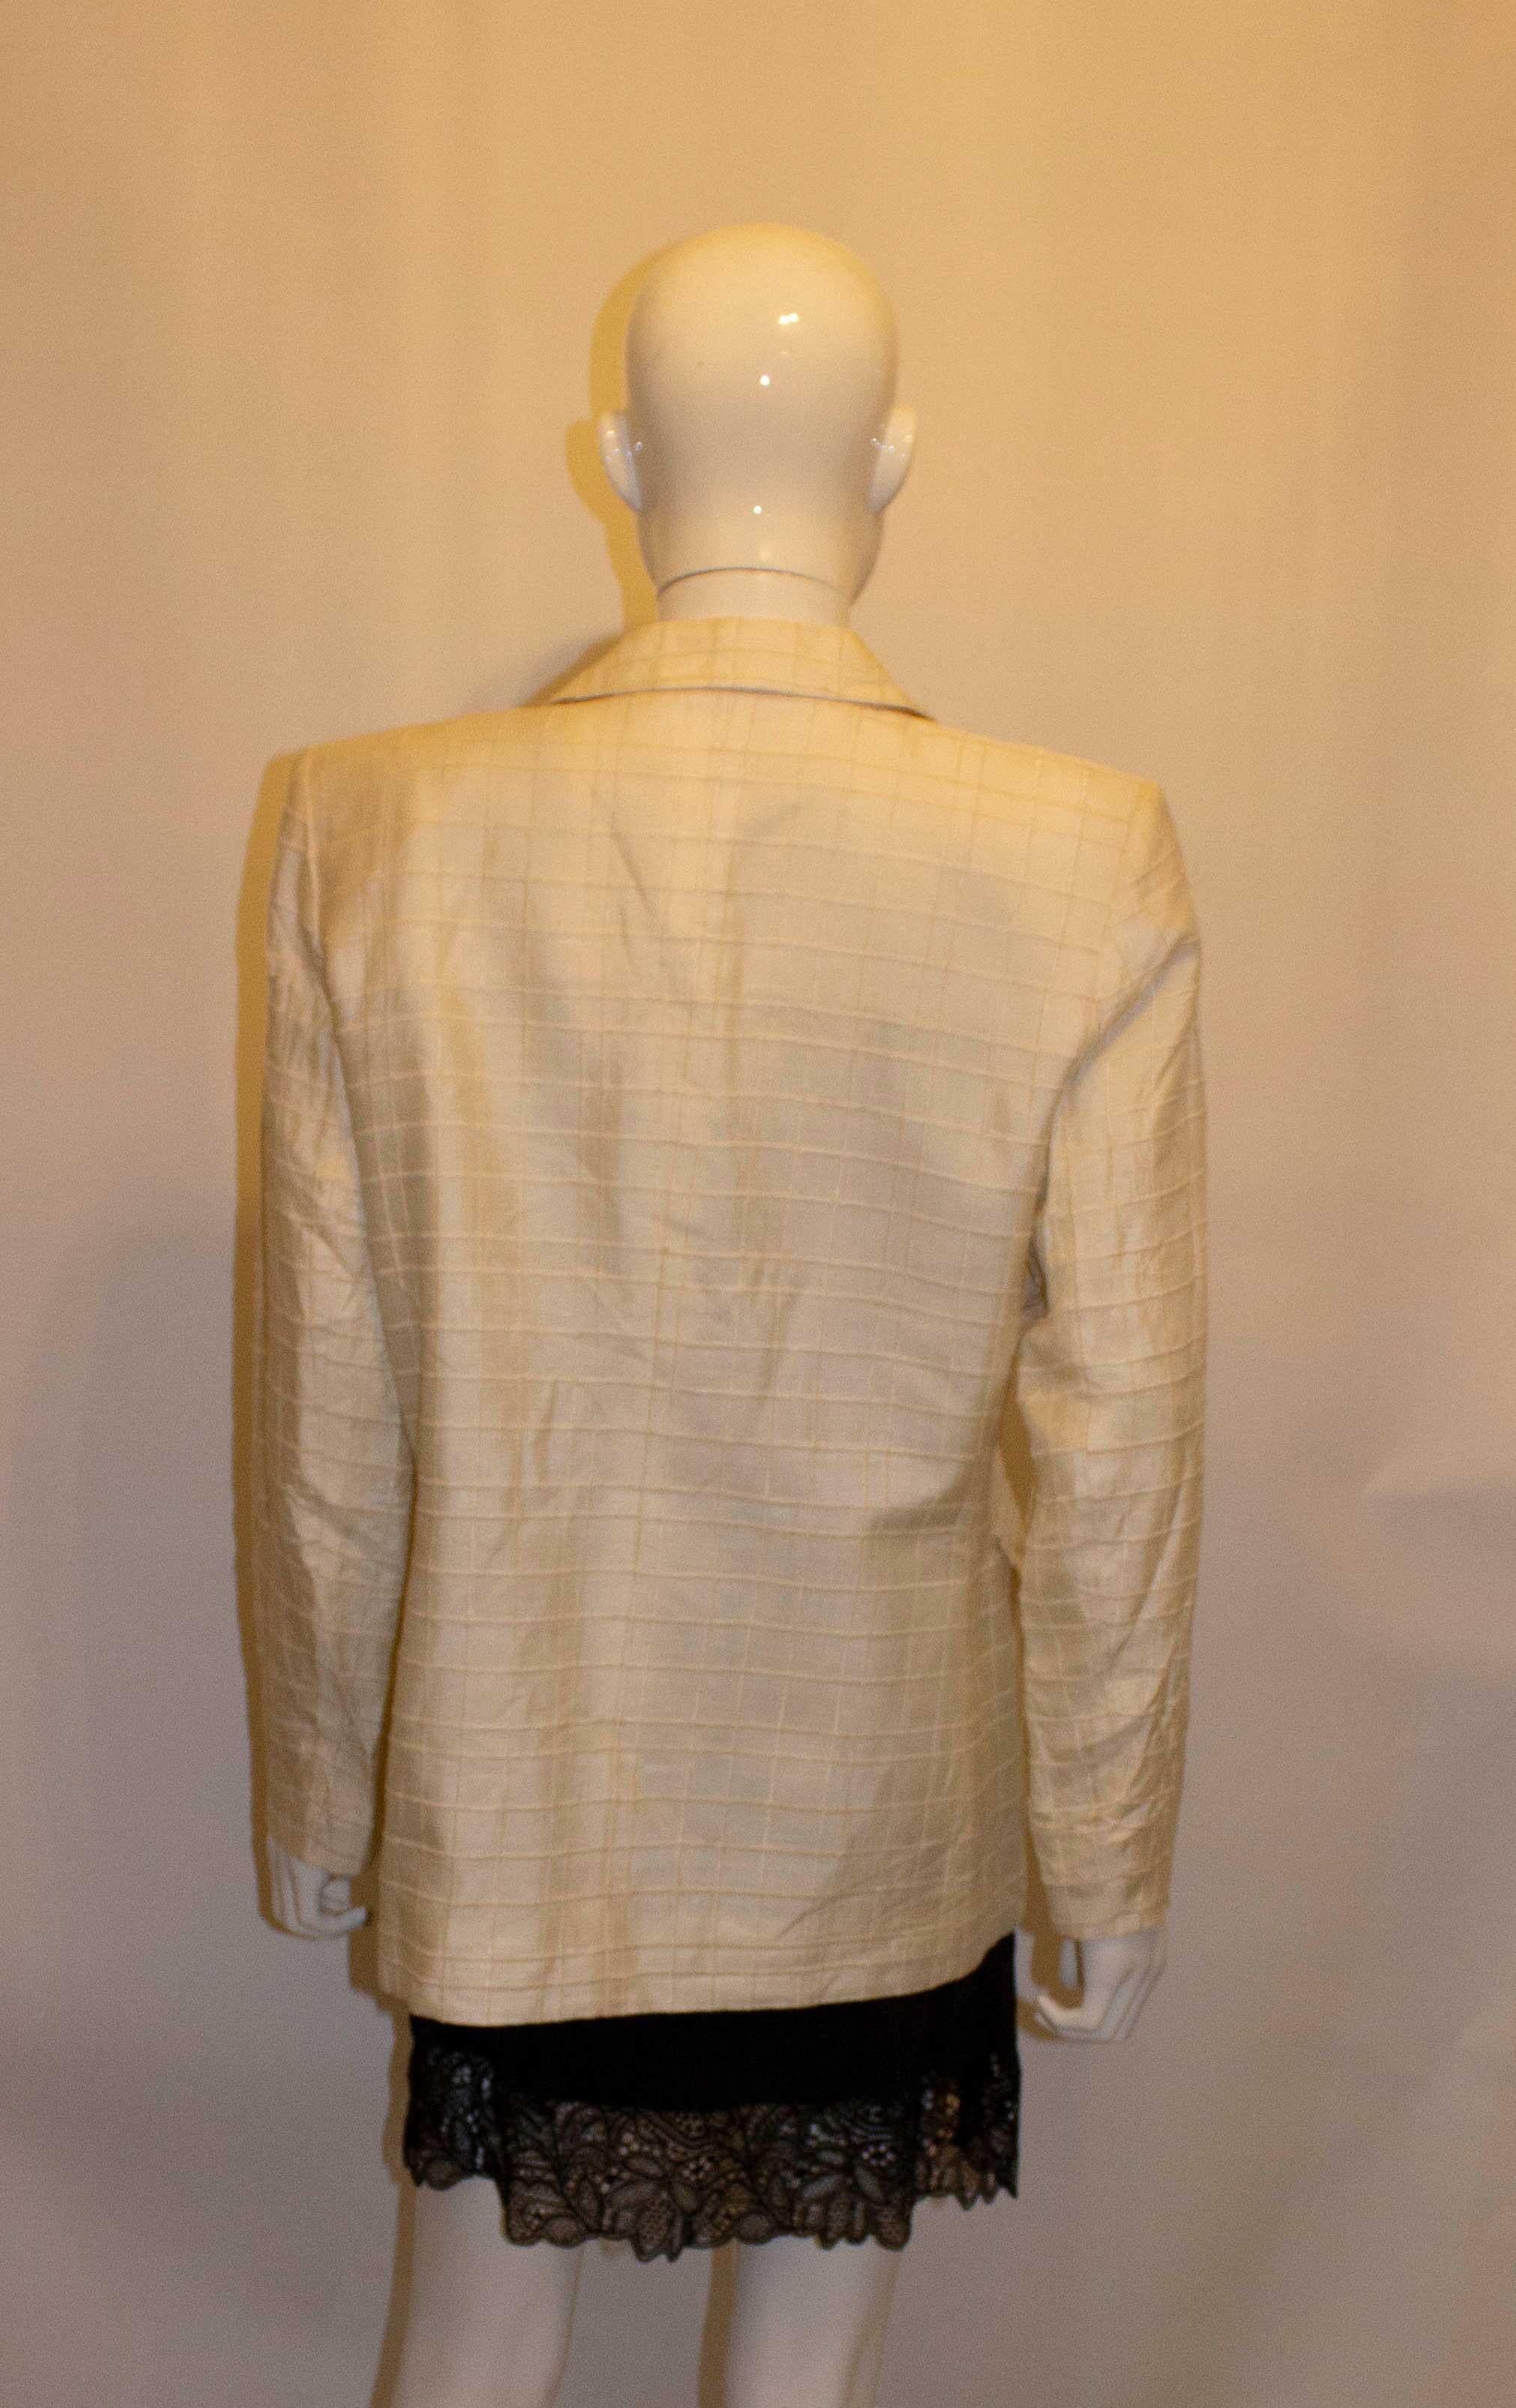 A great jacket for Fall. A wonderful , heavy white silk jacket with stitch panel detail from Yves Saint Laurent , Variation line. 
The jacket is a size 42 m, with 4 buttons on the front and two flap pockets. It is fully lined. 
Measurements: Bust up